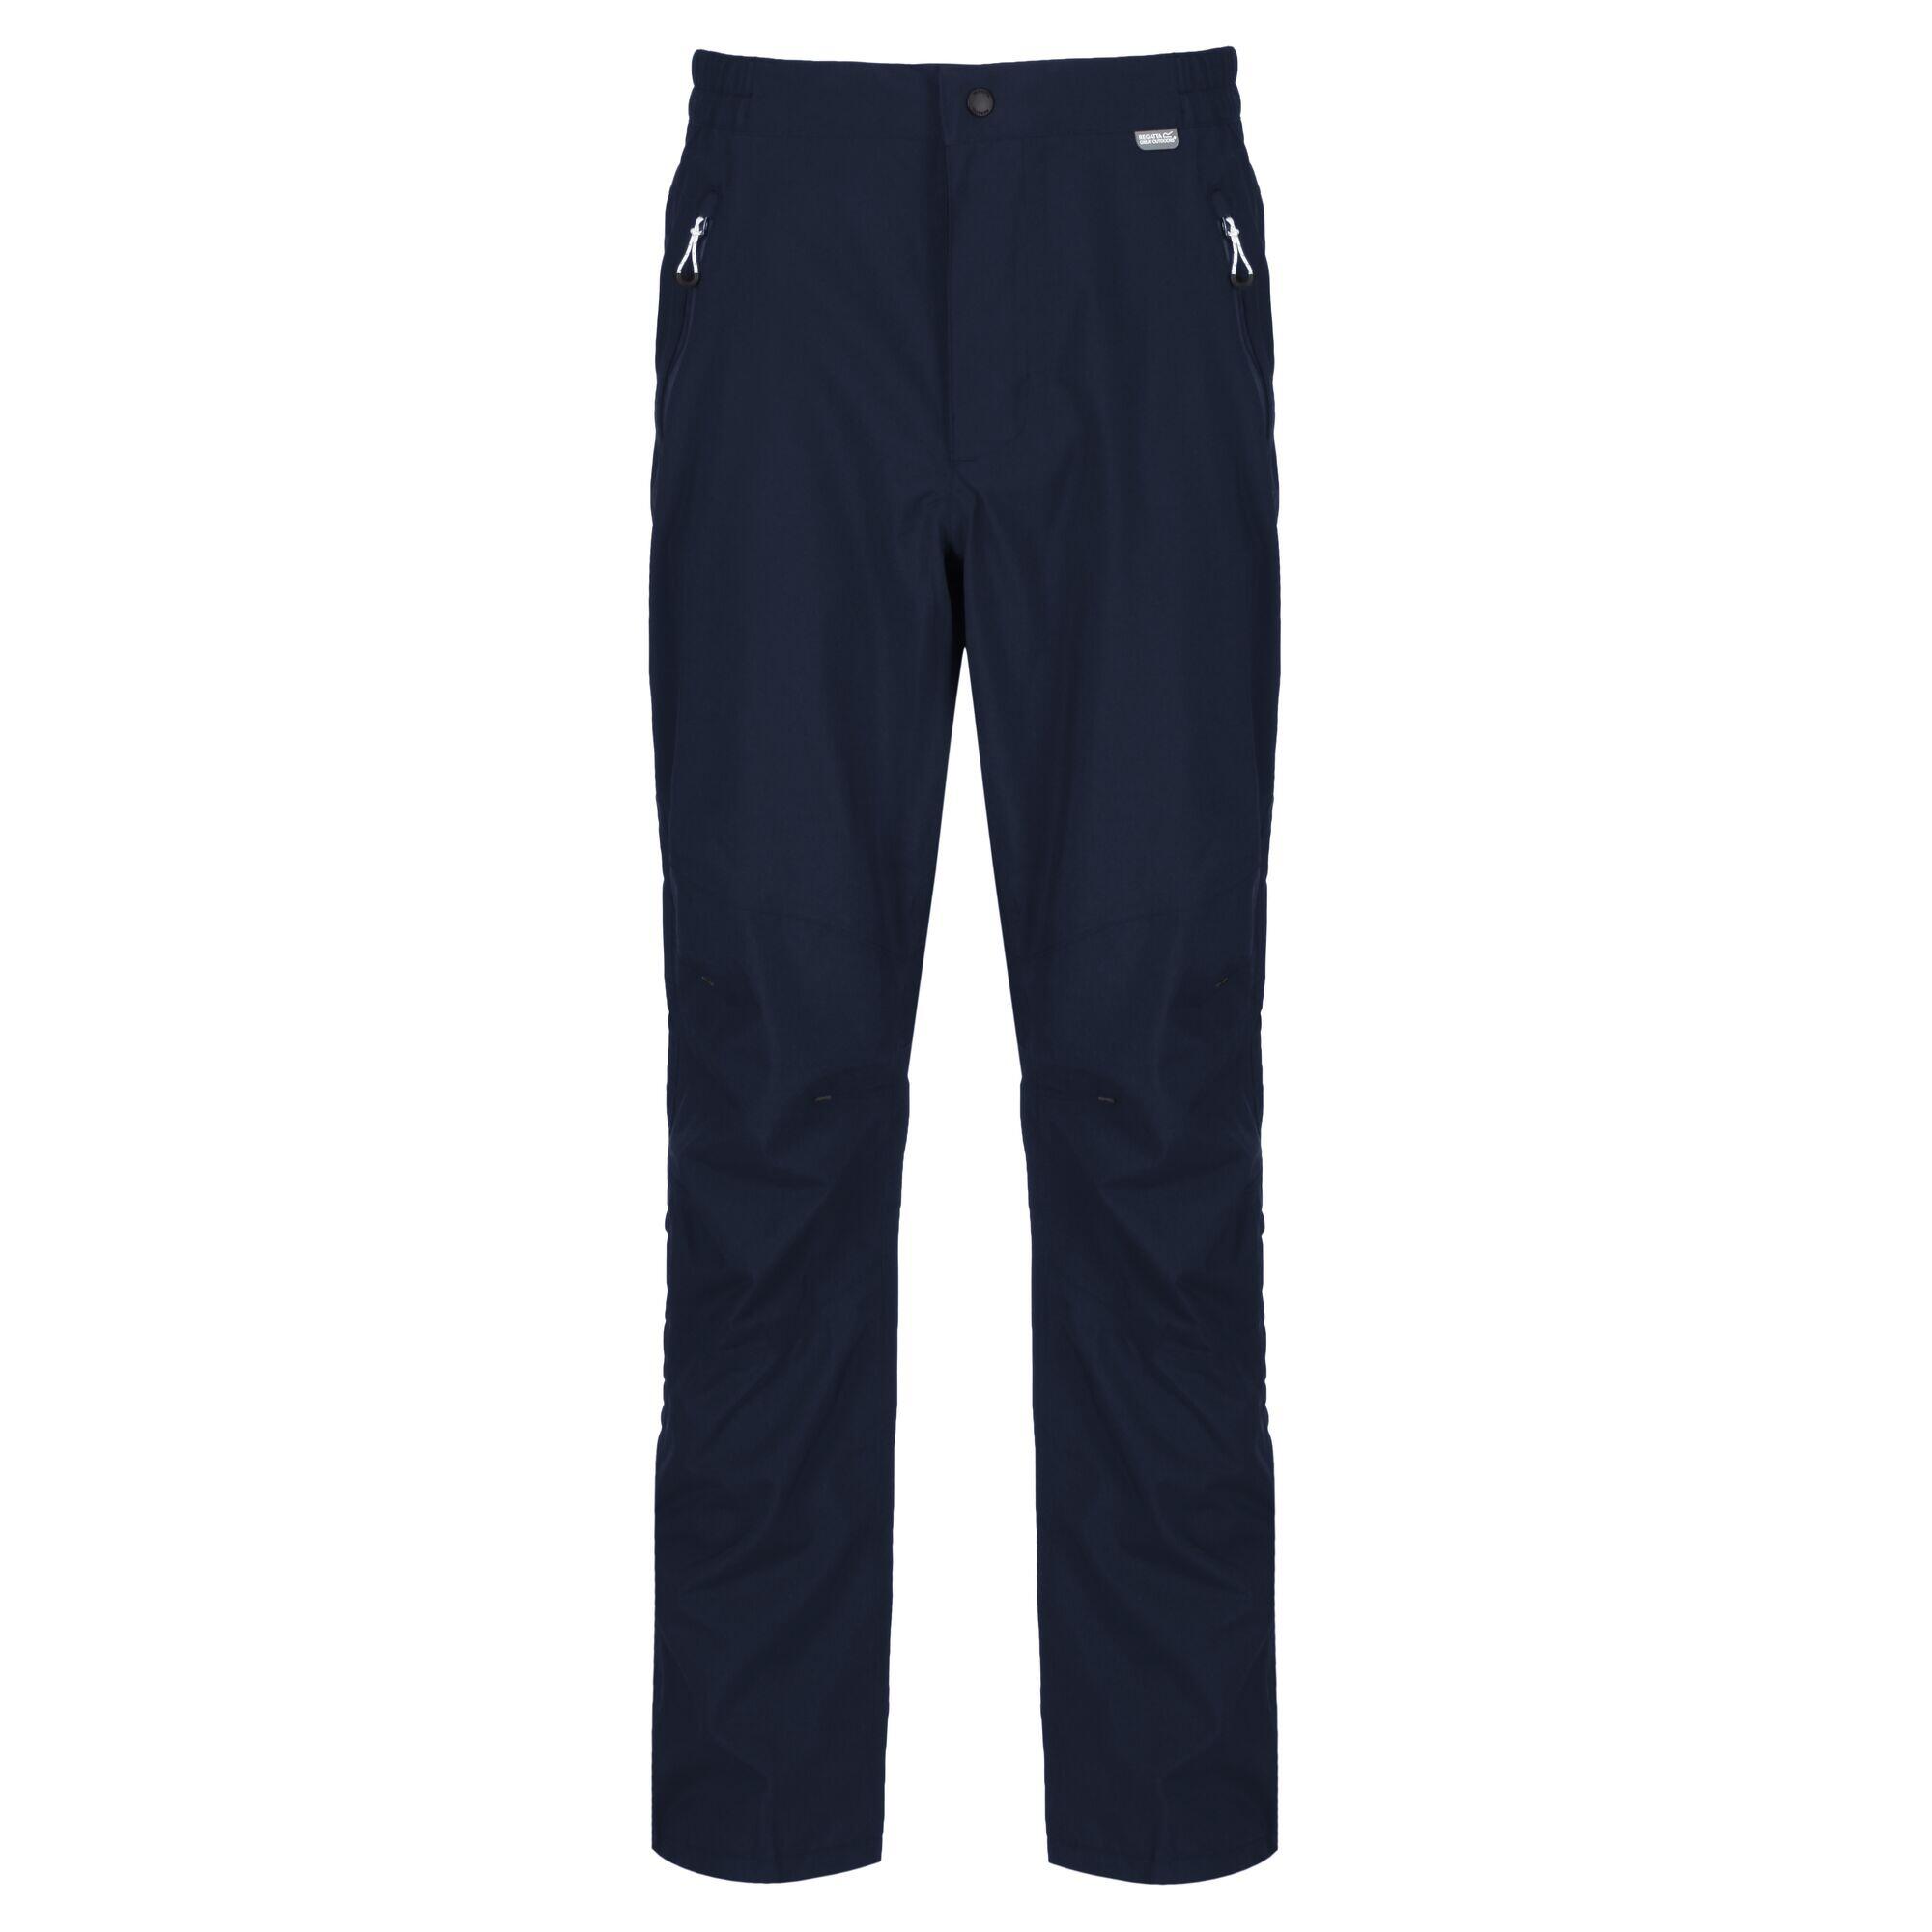 Highton Stretch Men's Hiking Overtrousers - Navy 5/5